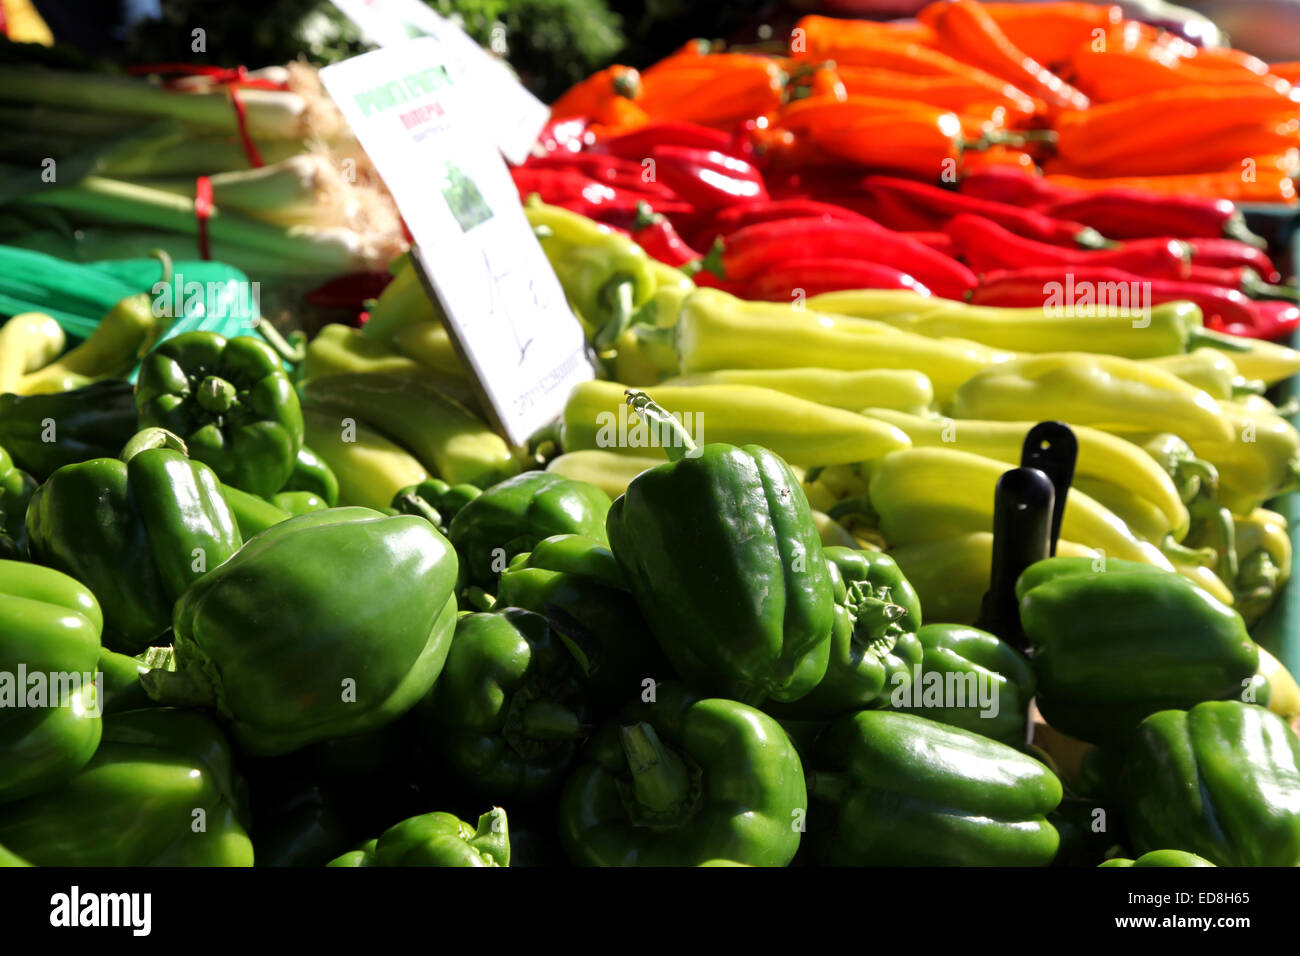 Bright, colourful vegetables on a Market stall in Crete, orange, red, lime green and dark green sweet peppers look delicious Stock Photo